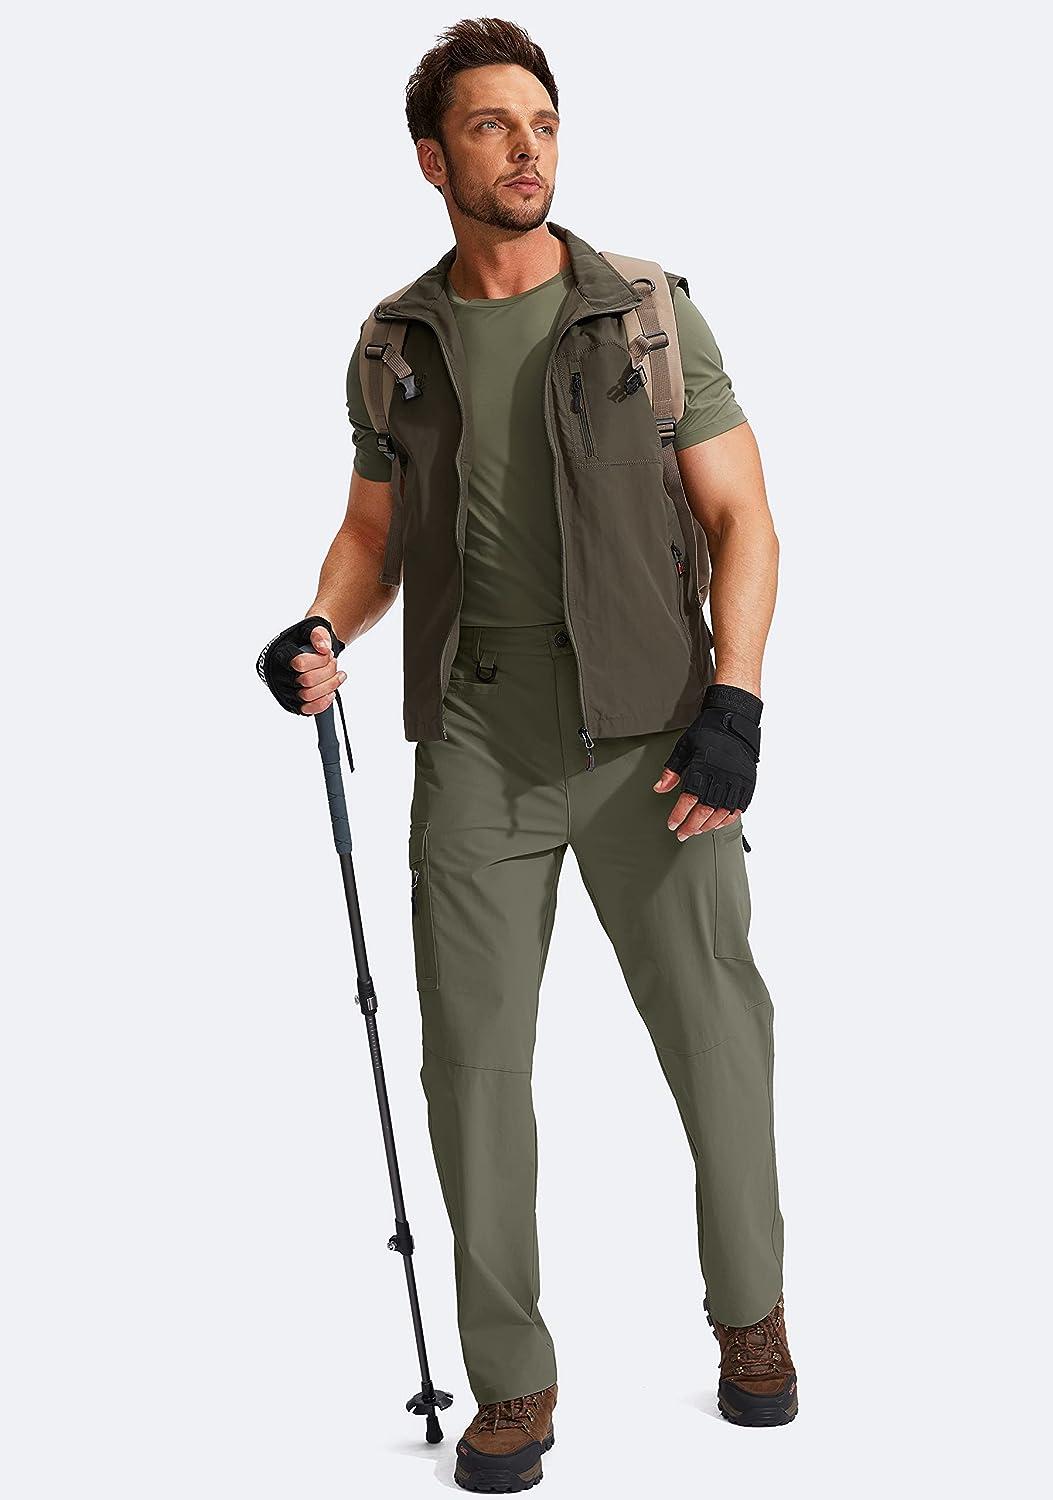 Gradual Mens Hiking Hiking Cargo Pants Water Resistant, Quick Dry,  Lightweight Outdoor Tactical Gear With Multi Pockets From Coralineny,  $38.48